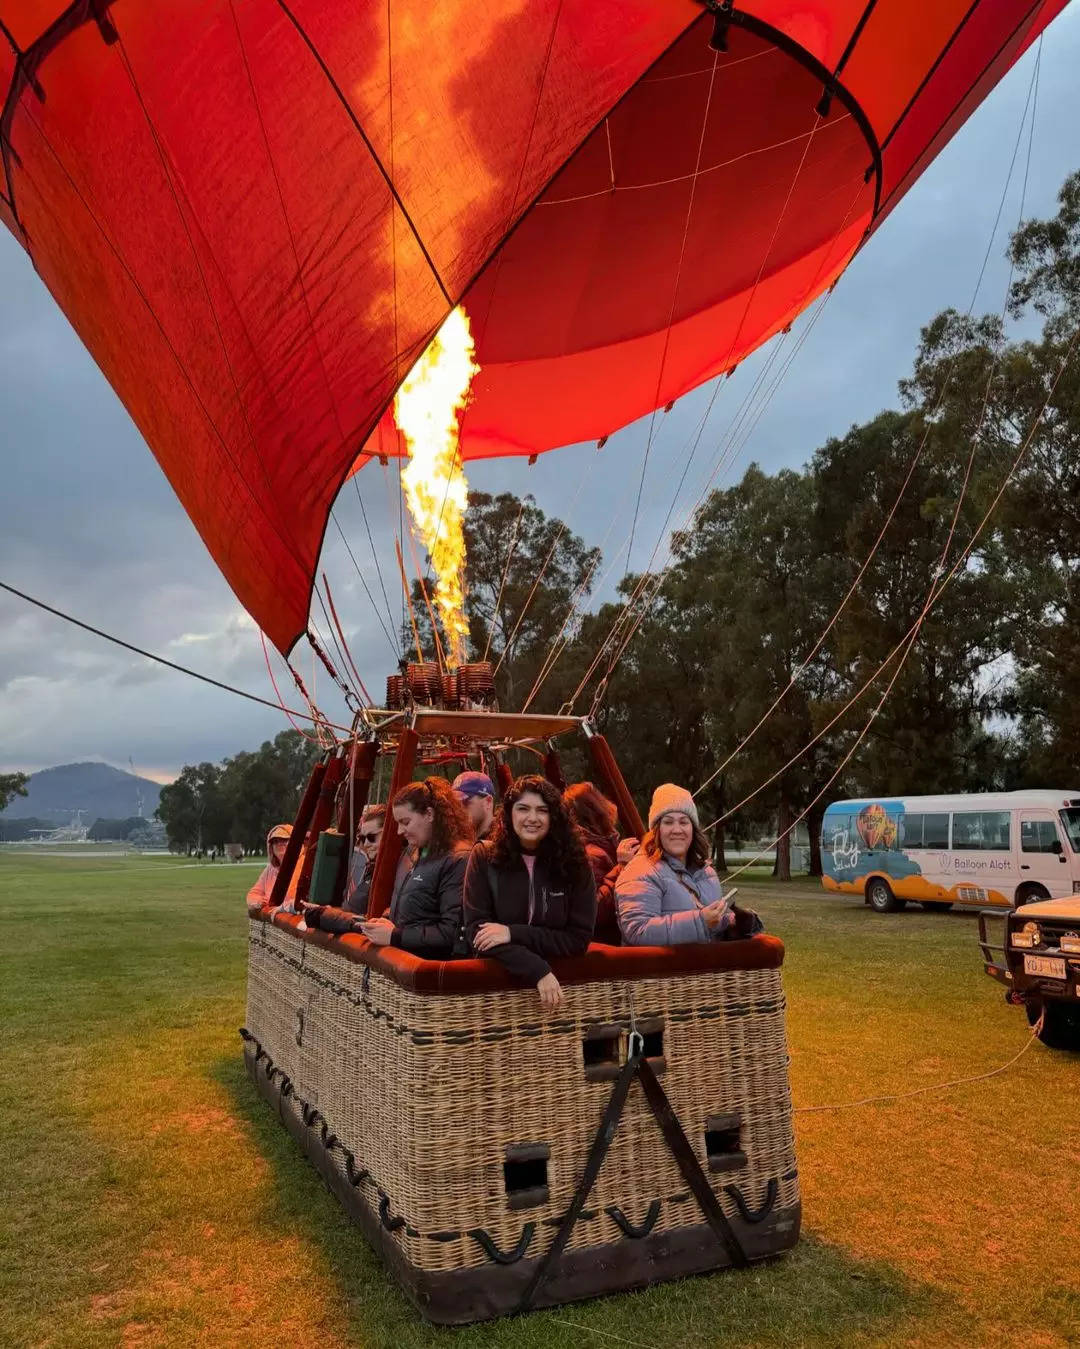 Take a hot air balloon ride over Canberra